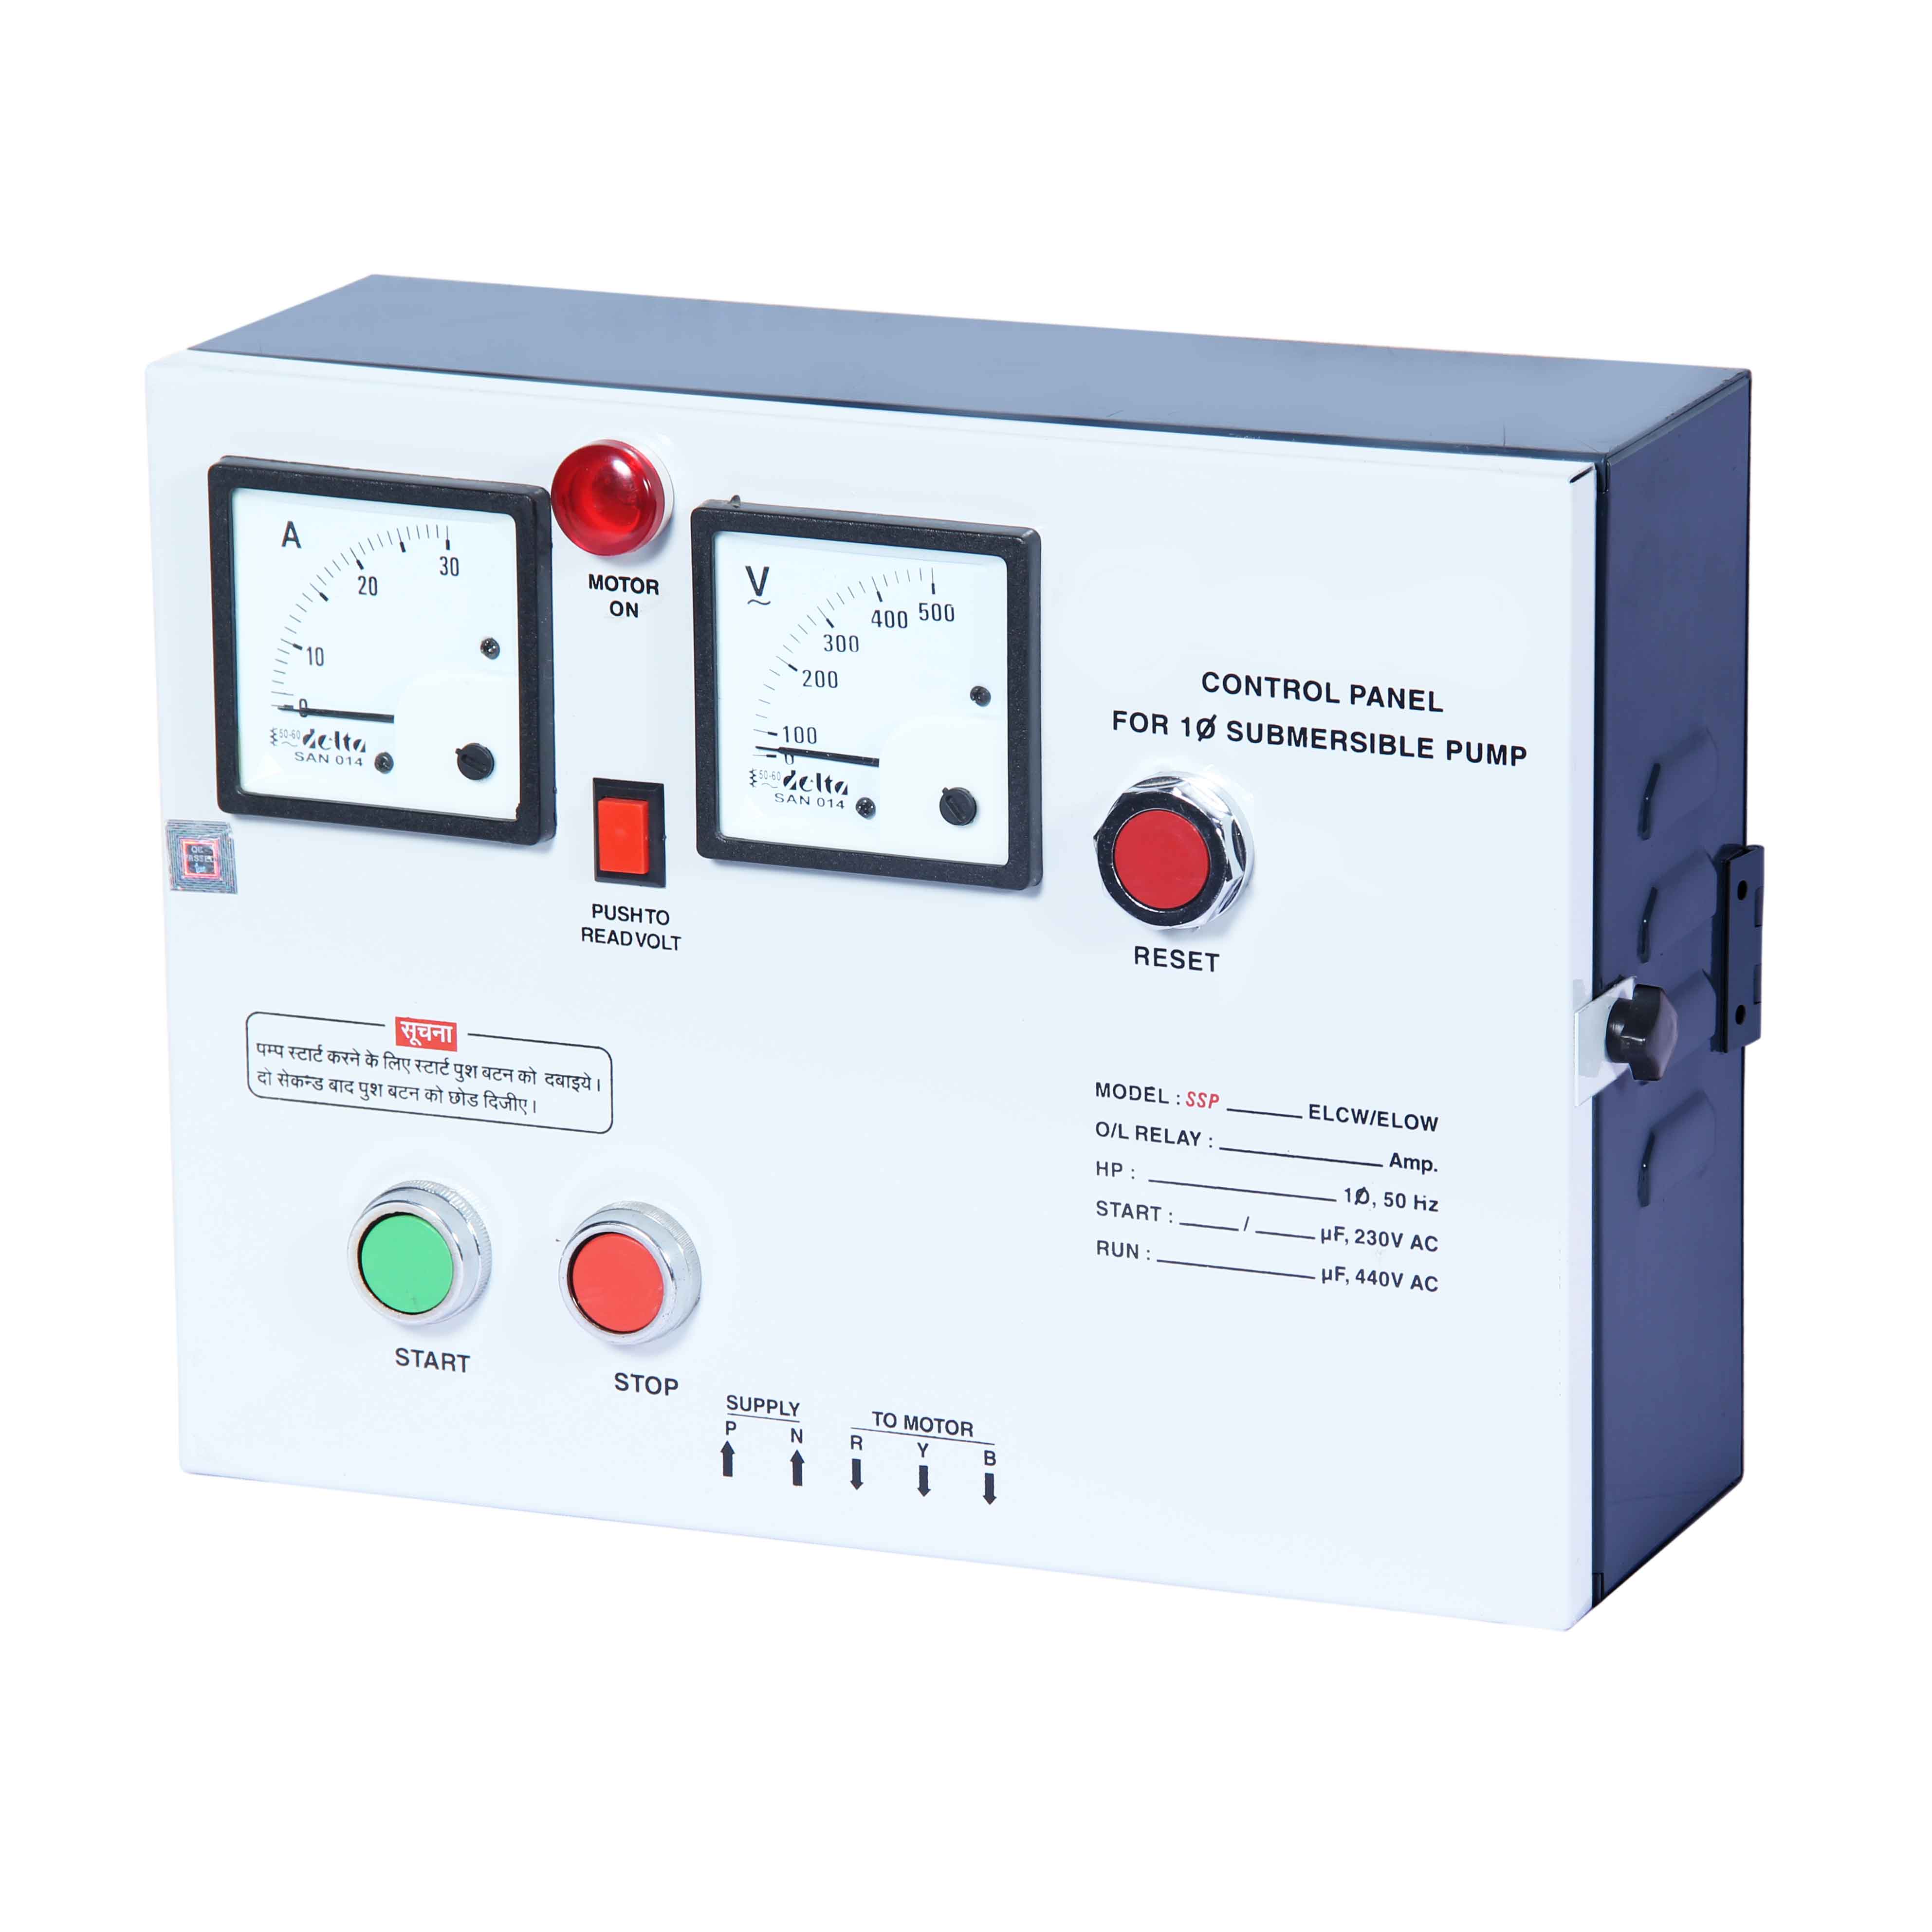 ELCW SQ MTR Single phase motor starter suitable for 2 HP submersible motor with overload protections by bi metallic relay